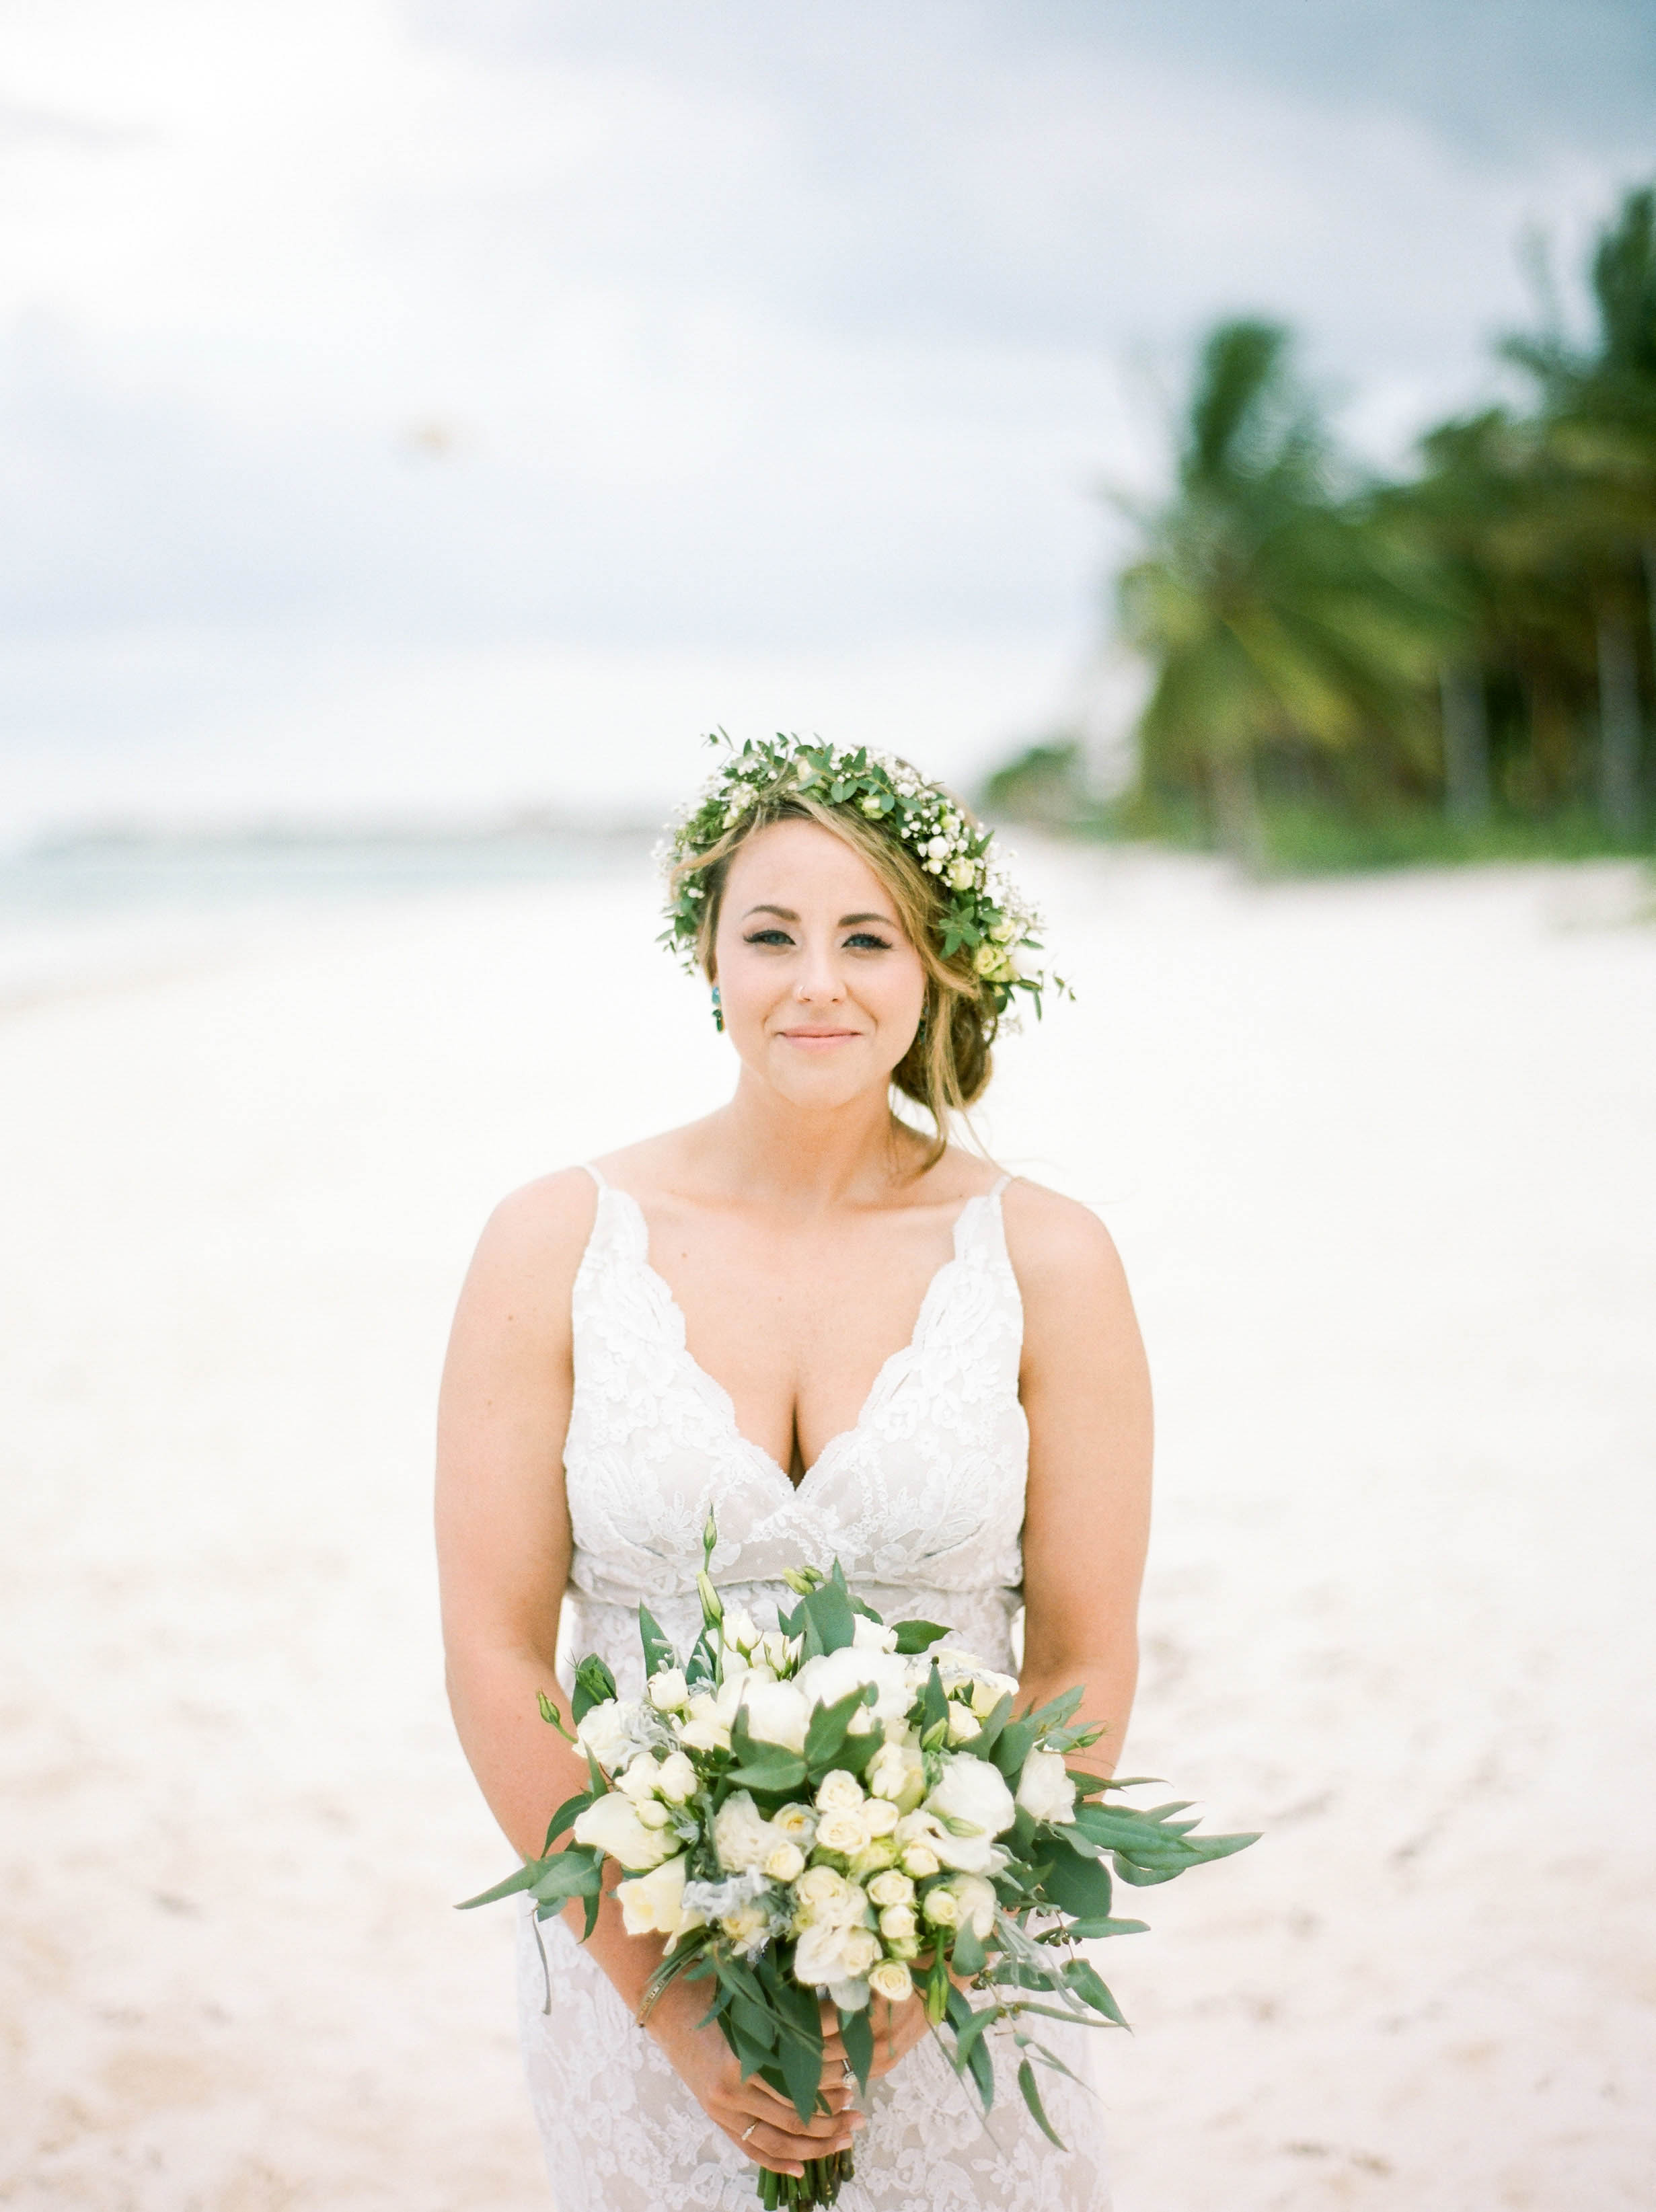 Tips for Planning a Destination Wedding | Carrie House Photography